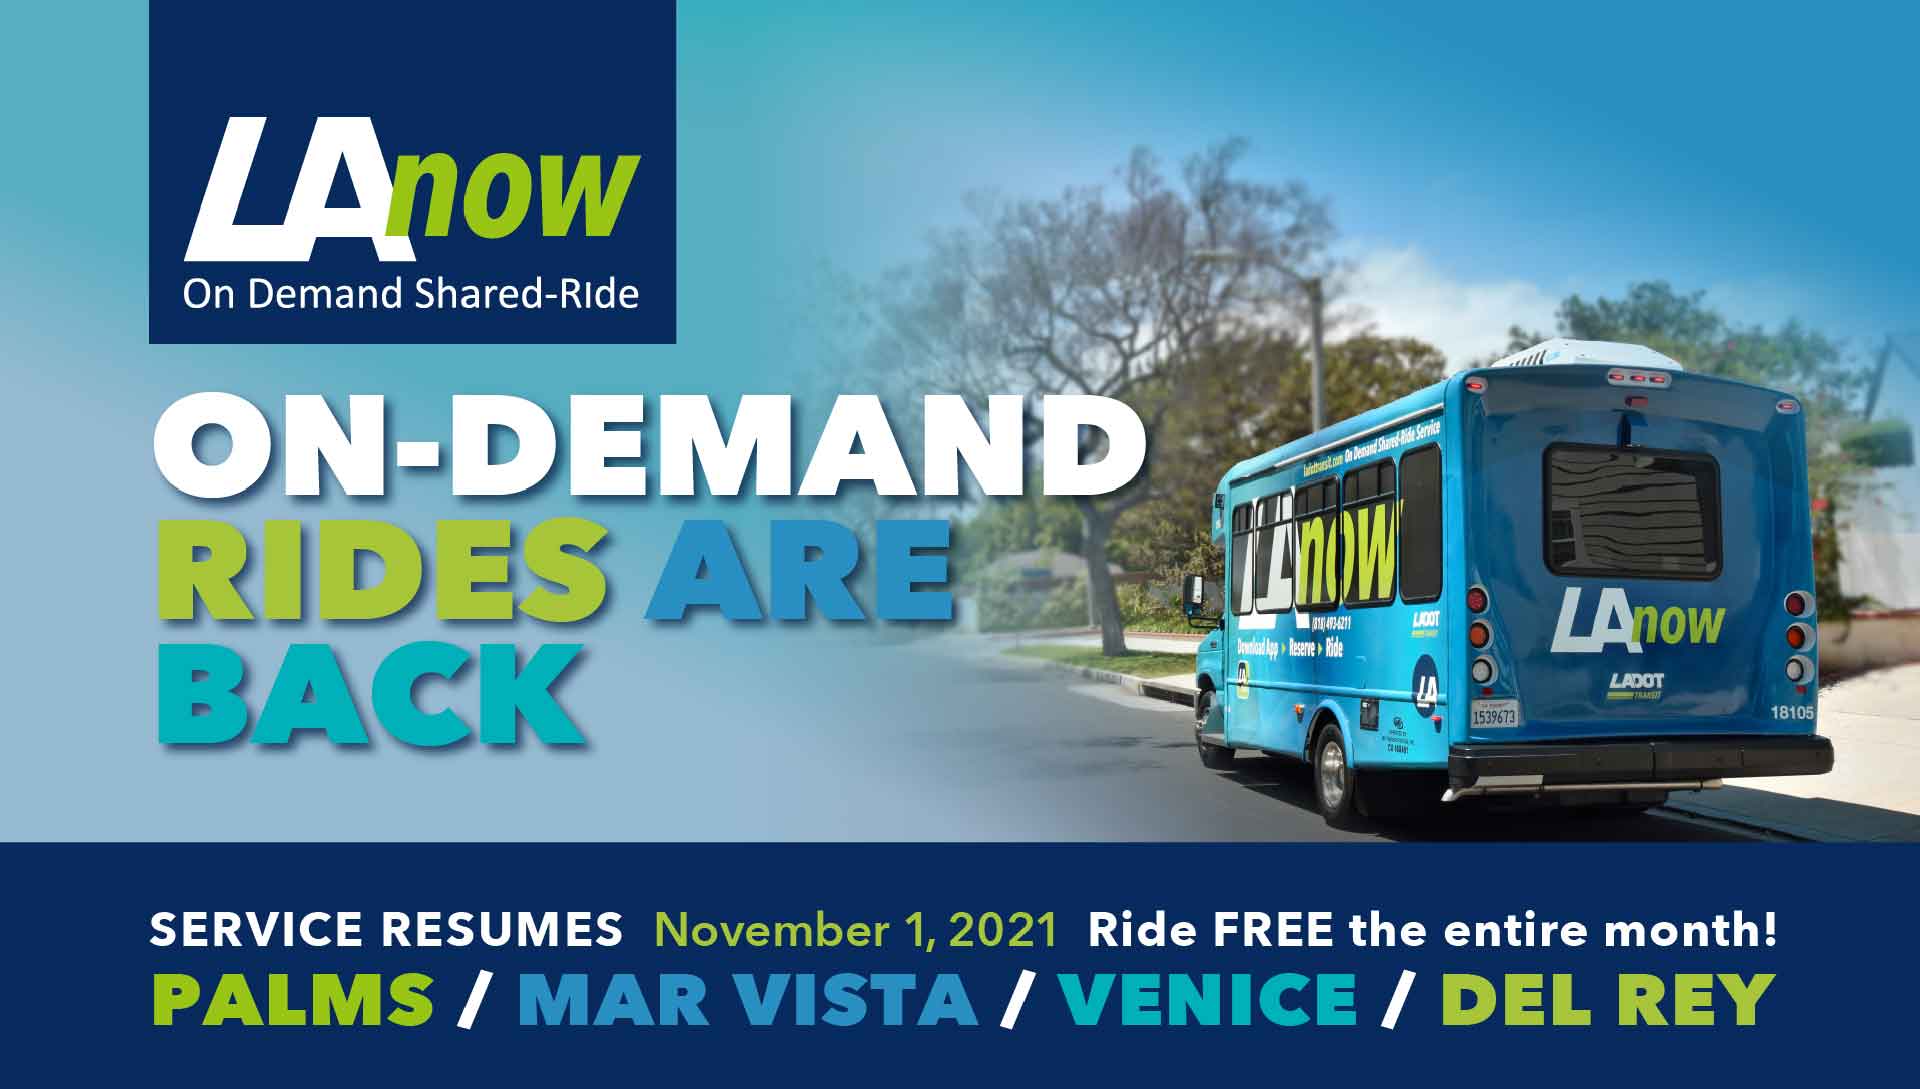 LADOT Announces Return of LAnow Service, the On-Demand, Shared Ride Program on the Westside